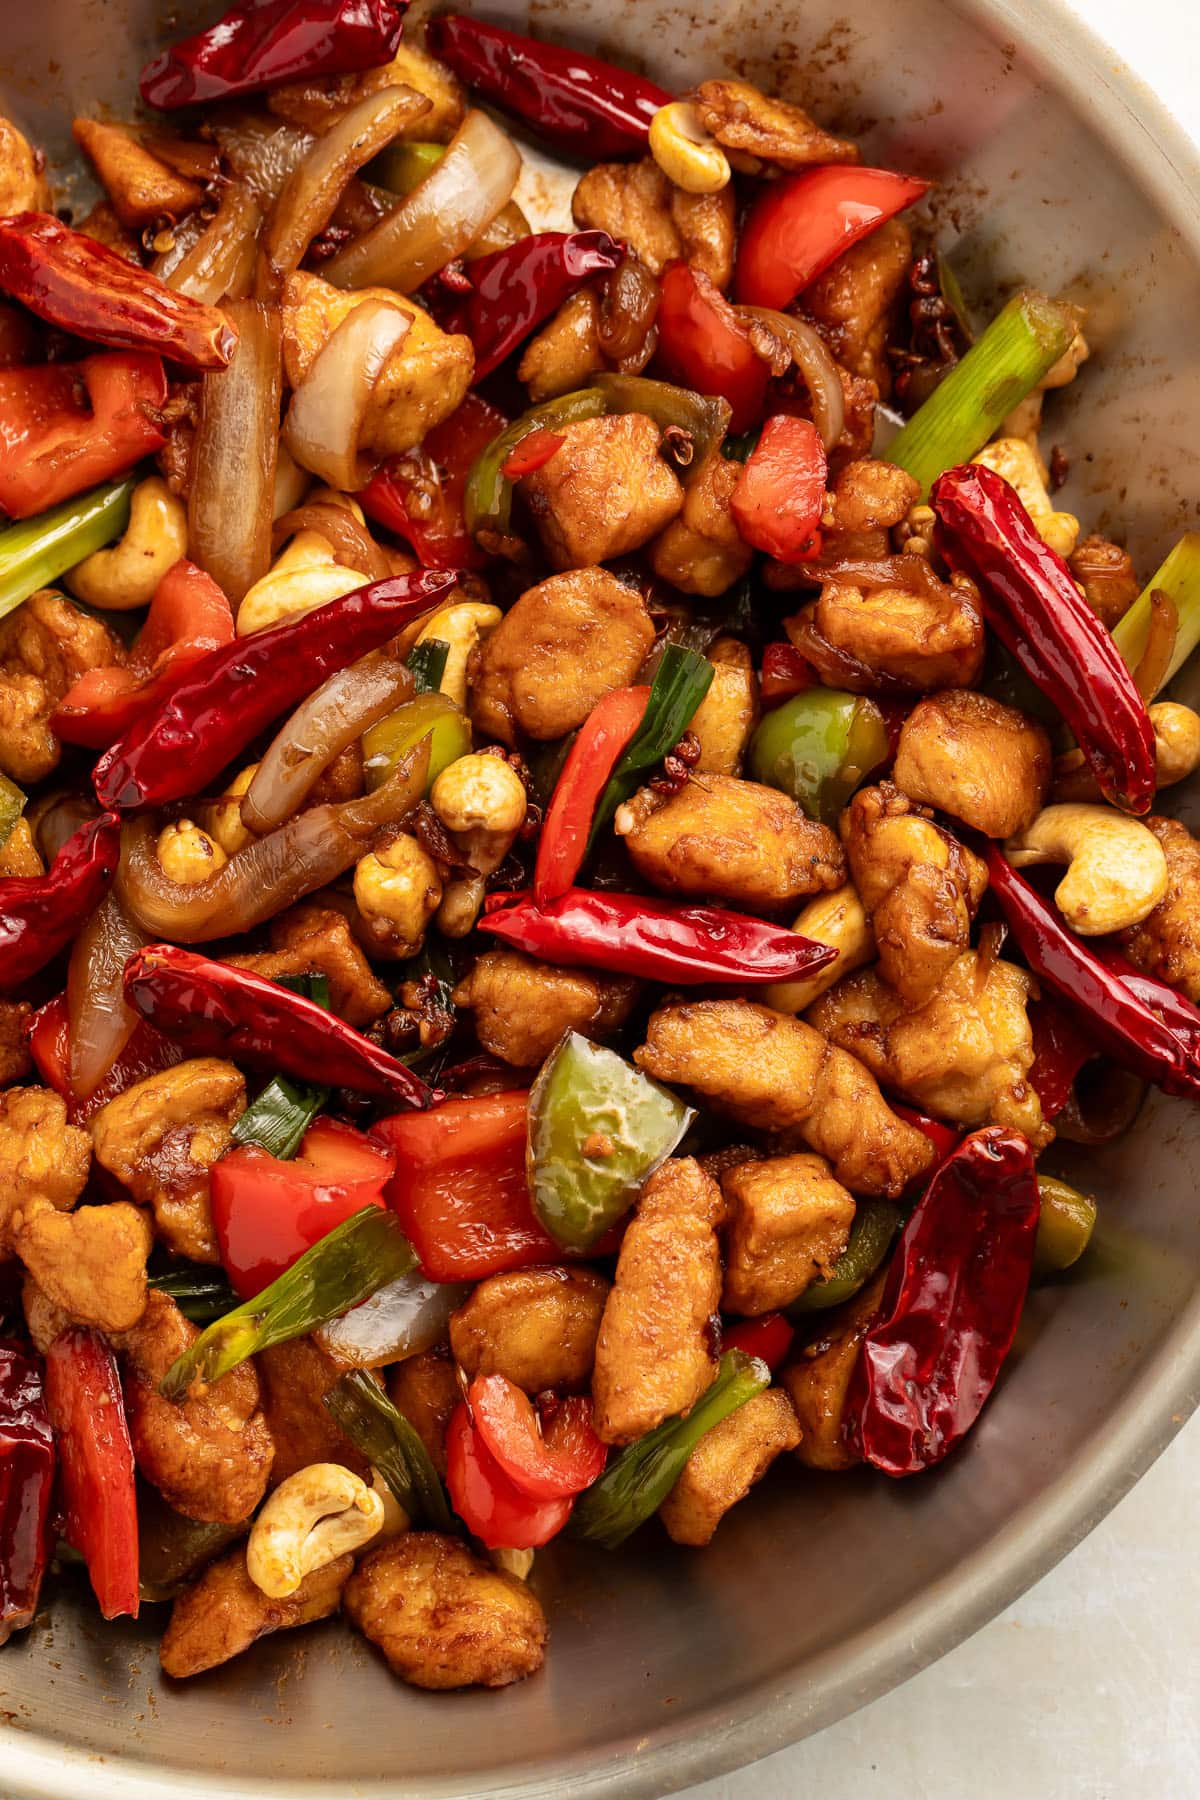 Top-down view of a large wok holding prepared Szechuan chicken with cashews, chilies, peppercorns, and chicken.